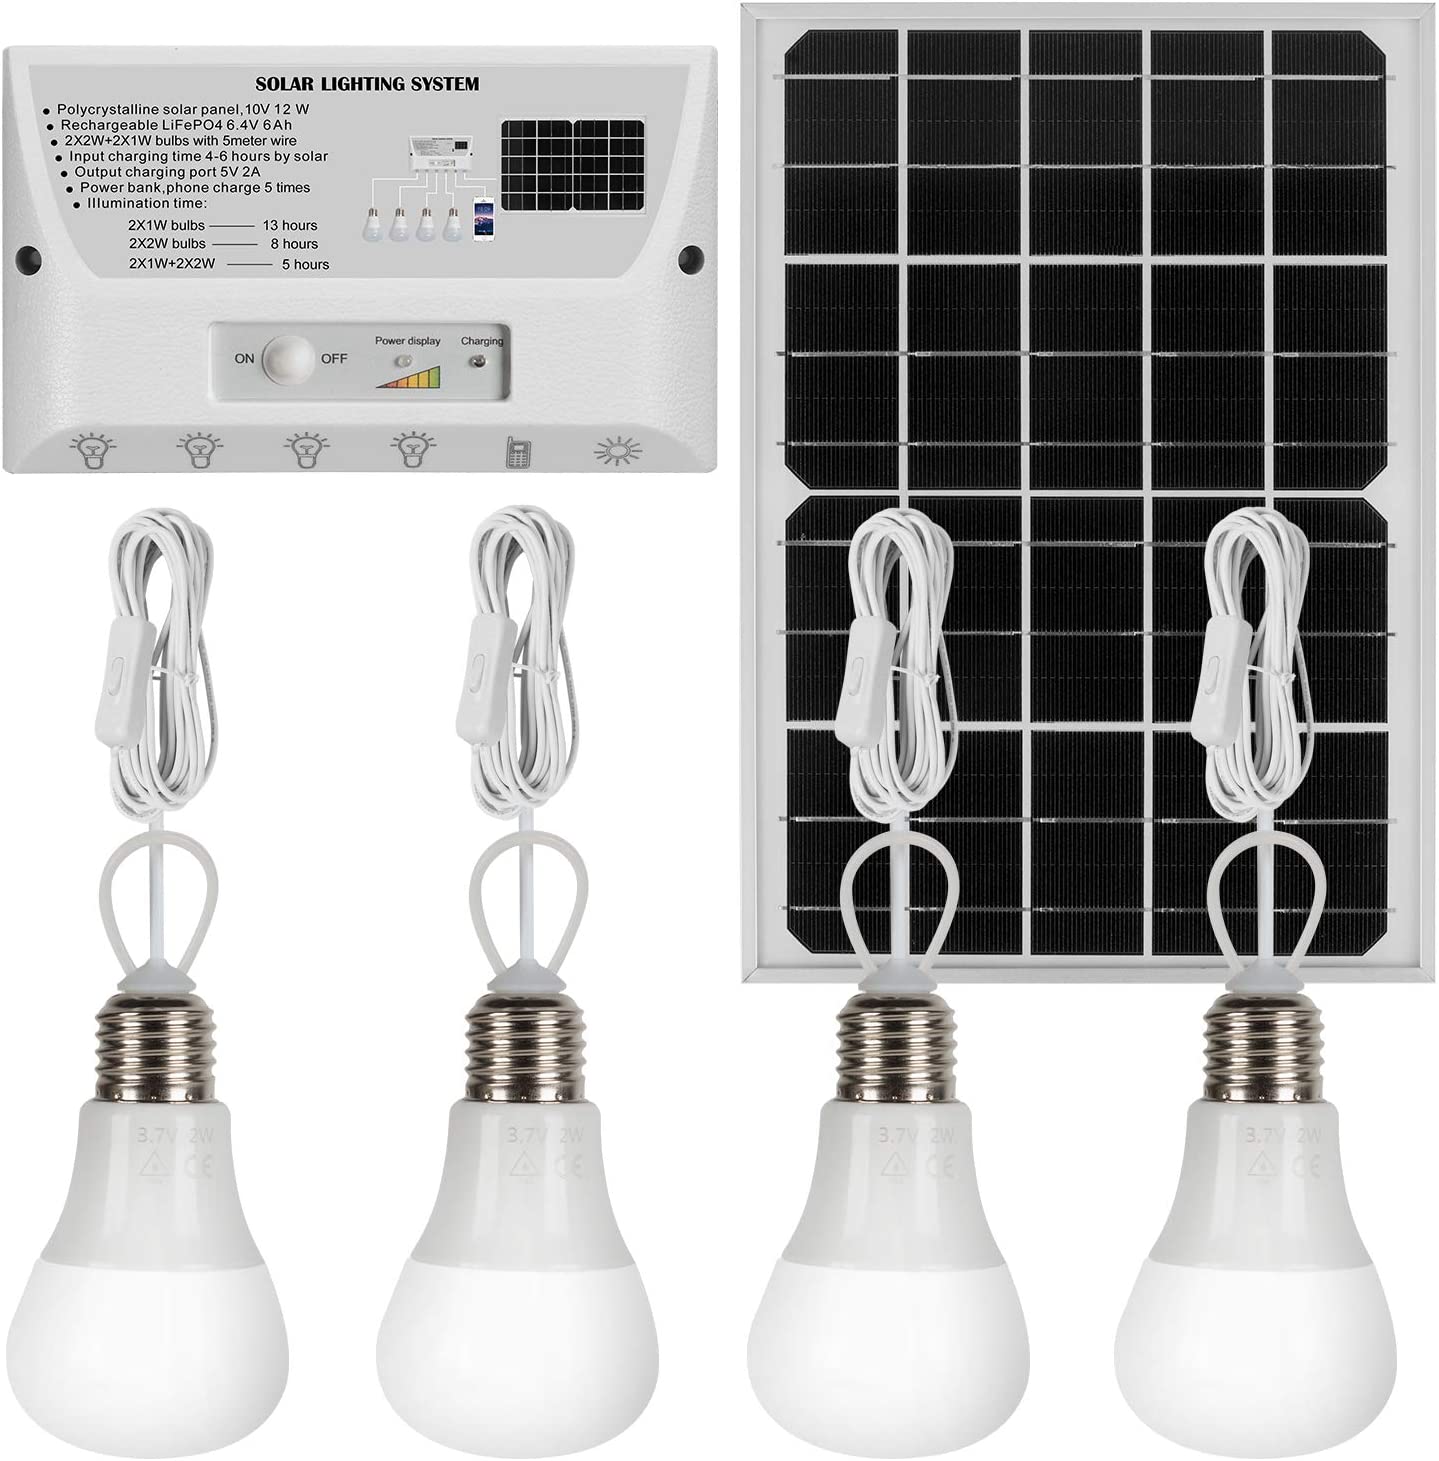 YINGHAO Solar Light Indoor Outdoor, Home Emergency Backup Power Supply, Solar Lighting System, 4 LED Bulbs with Switches, 33FT Cord Pendant lights for Shed Barn Garden Camping Plus AC Charging Adapter